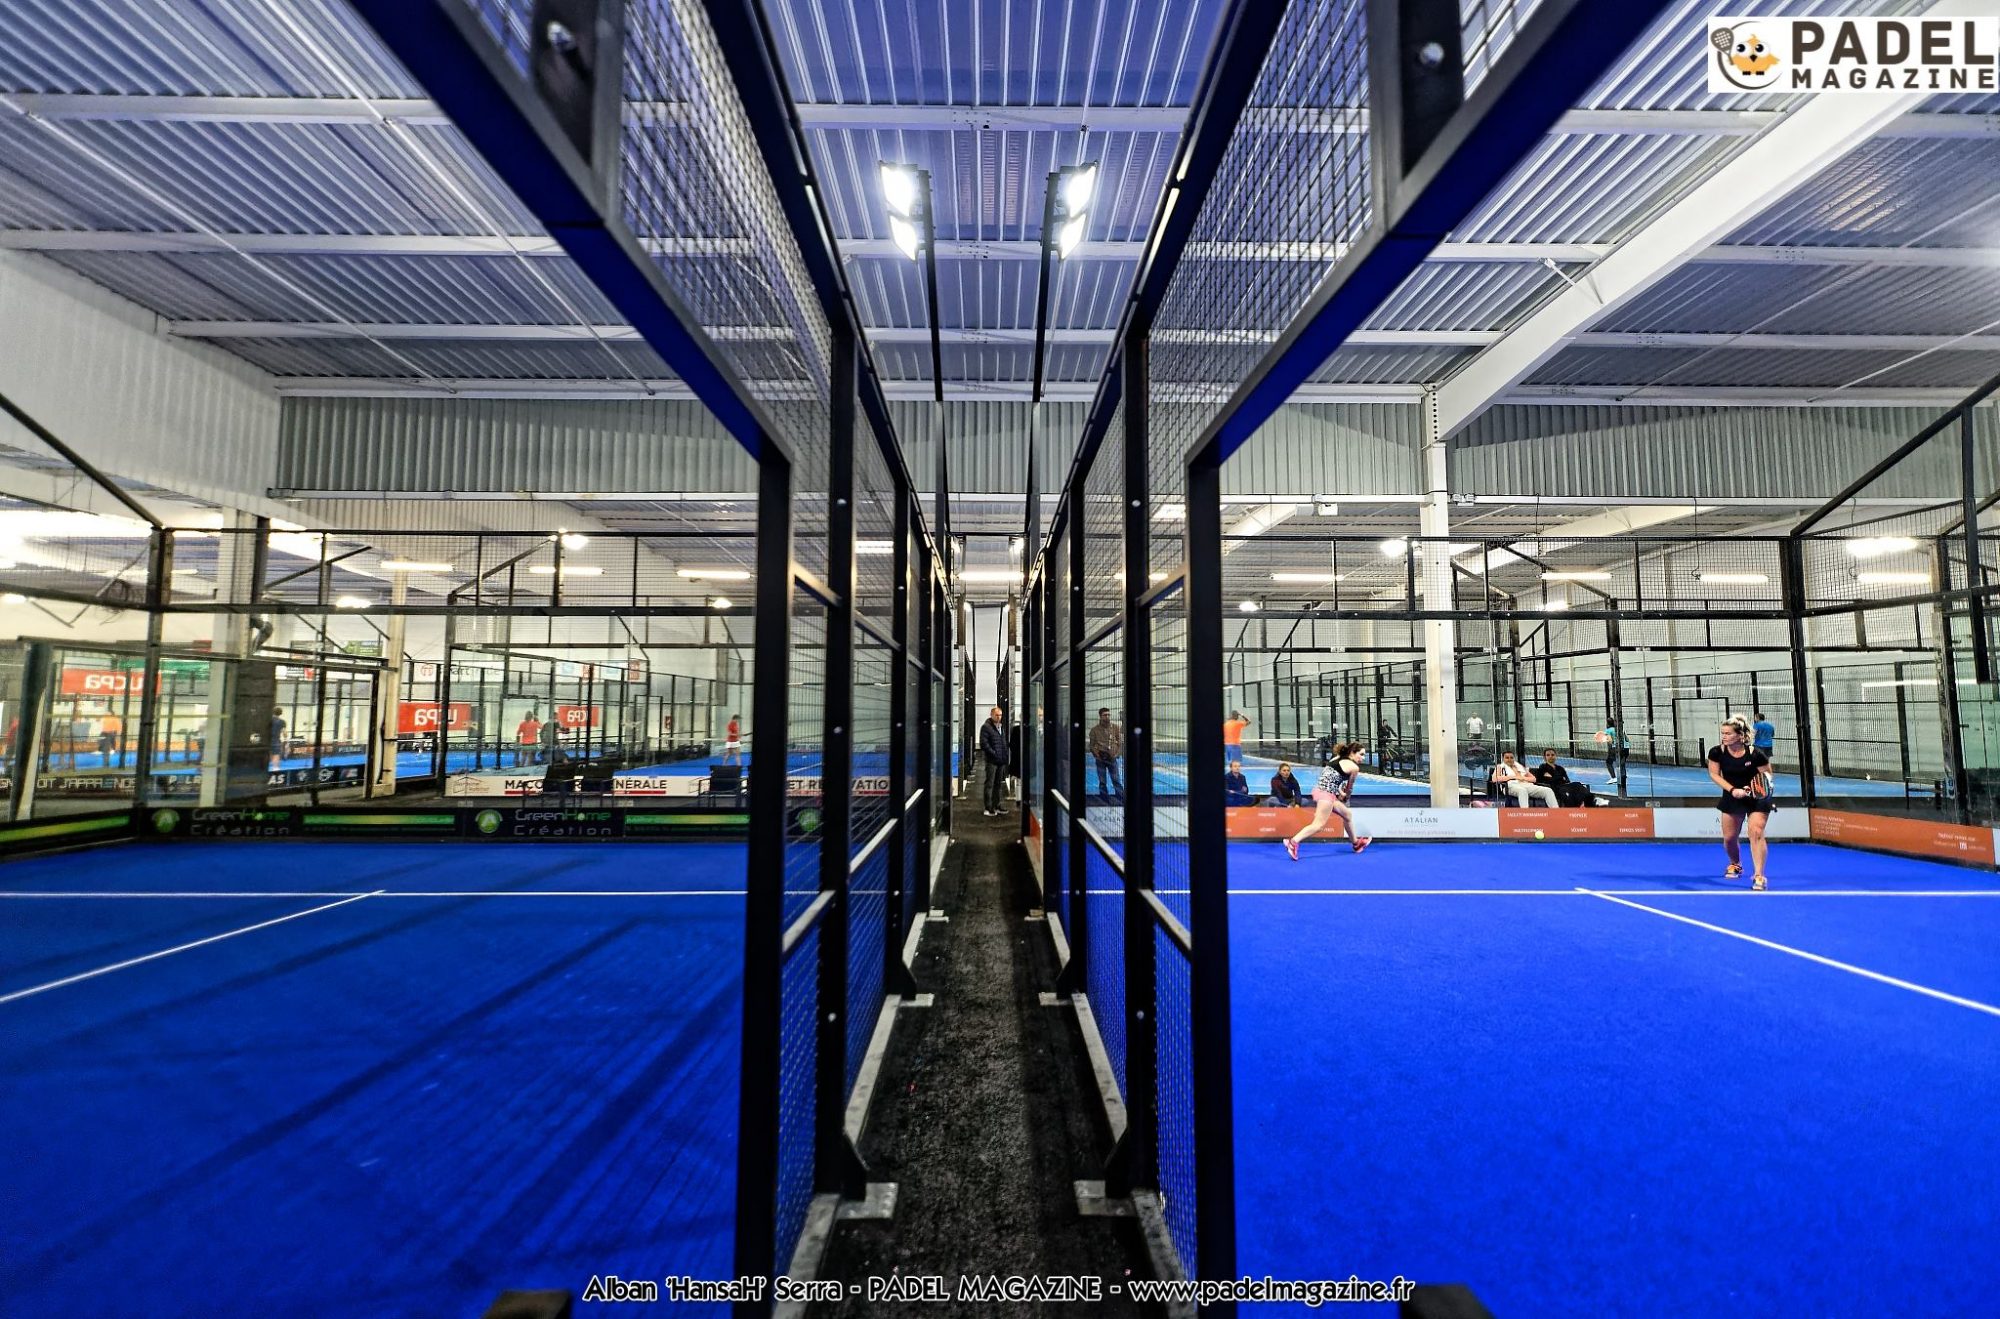 FFT Padel Tour Toulouse: information